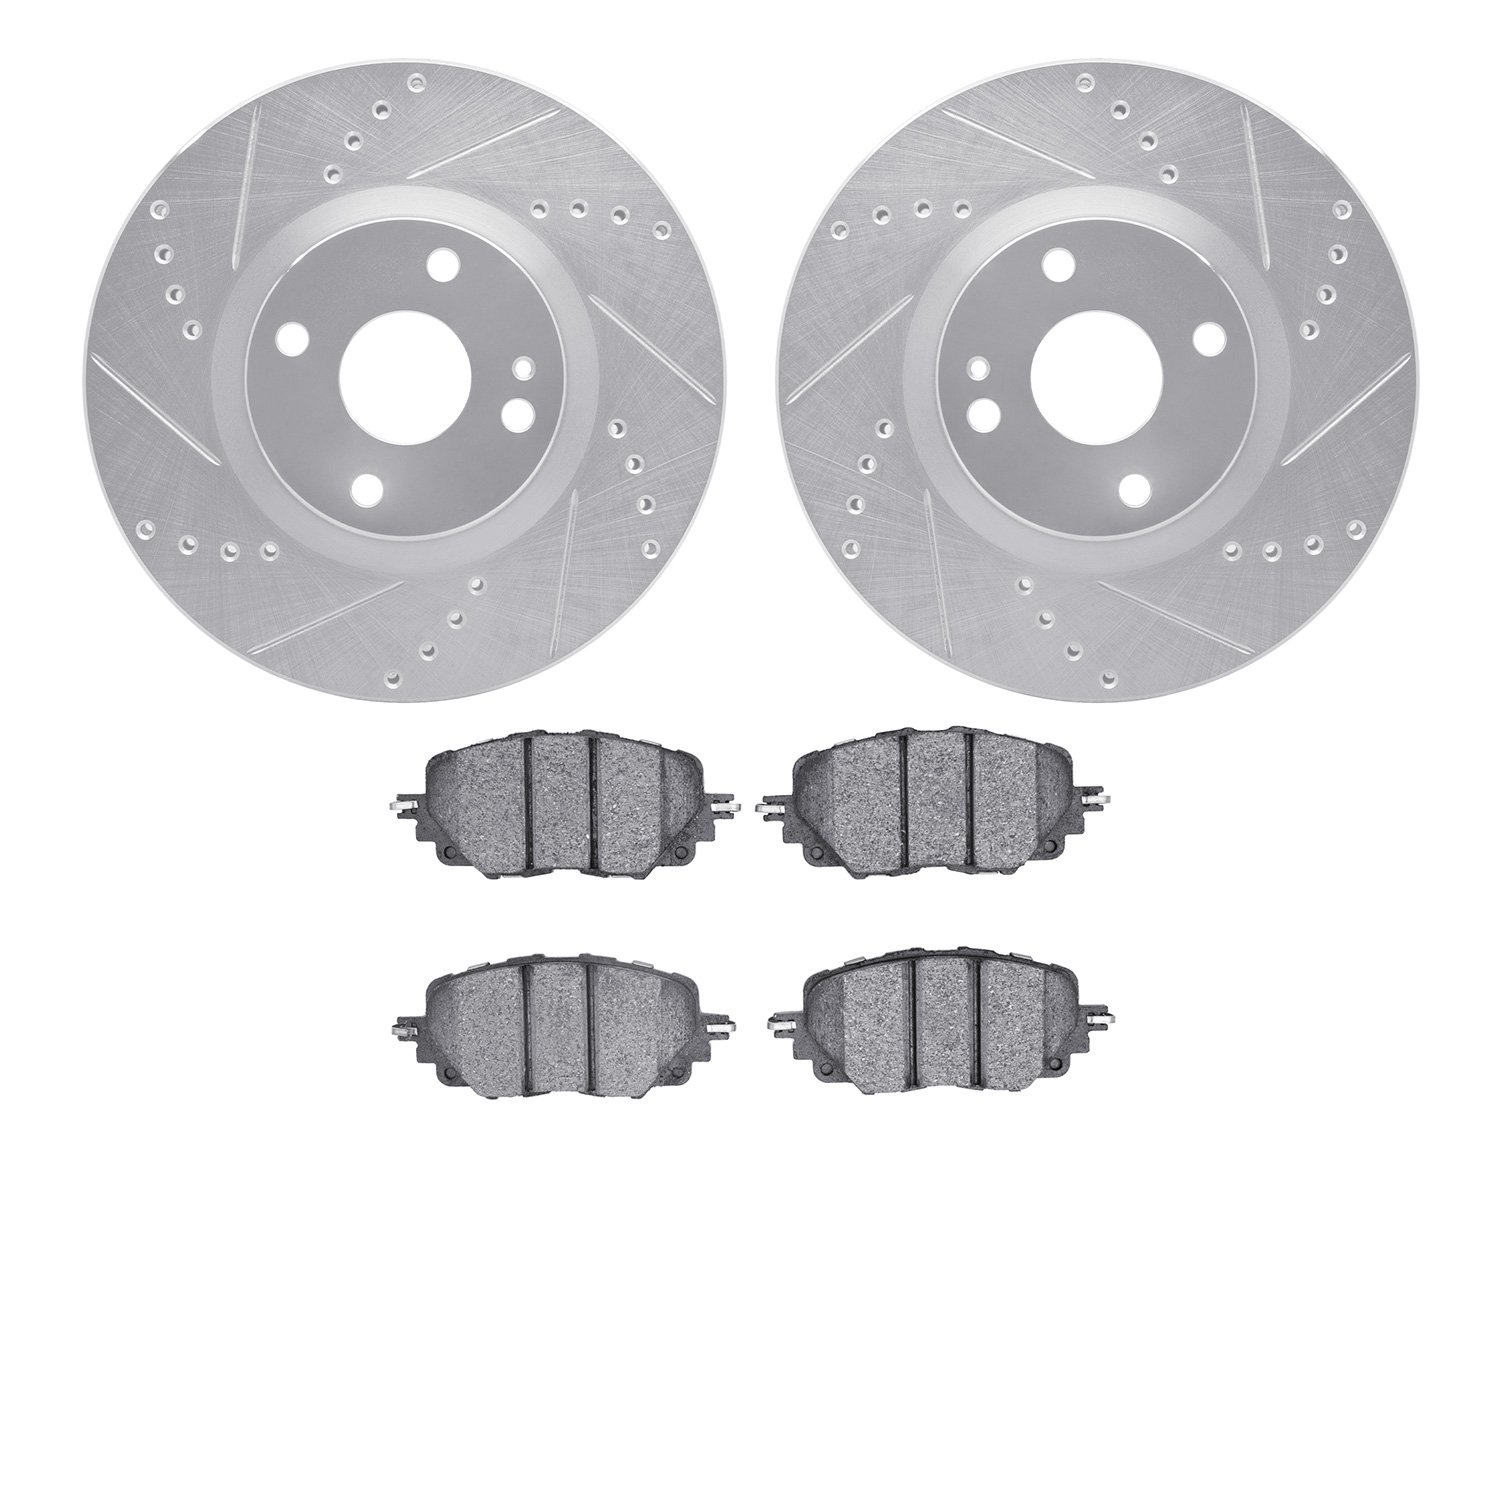 7302-80086 Drilled/Slotted Brake Rotor with 3000-Series Ceramic Brake Pads Kit [Silver], Fits Select Multiple Makes/Models, Posi